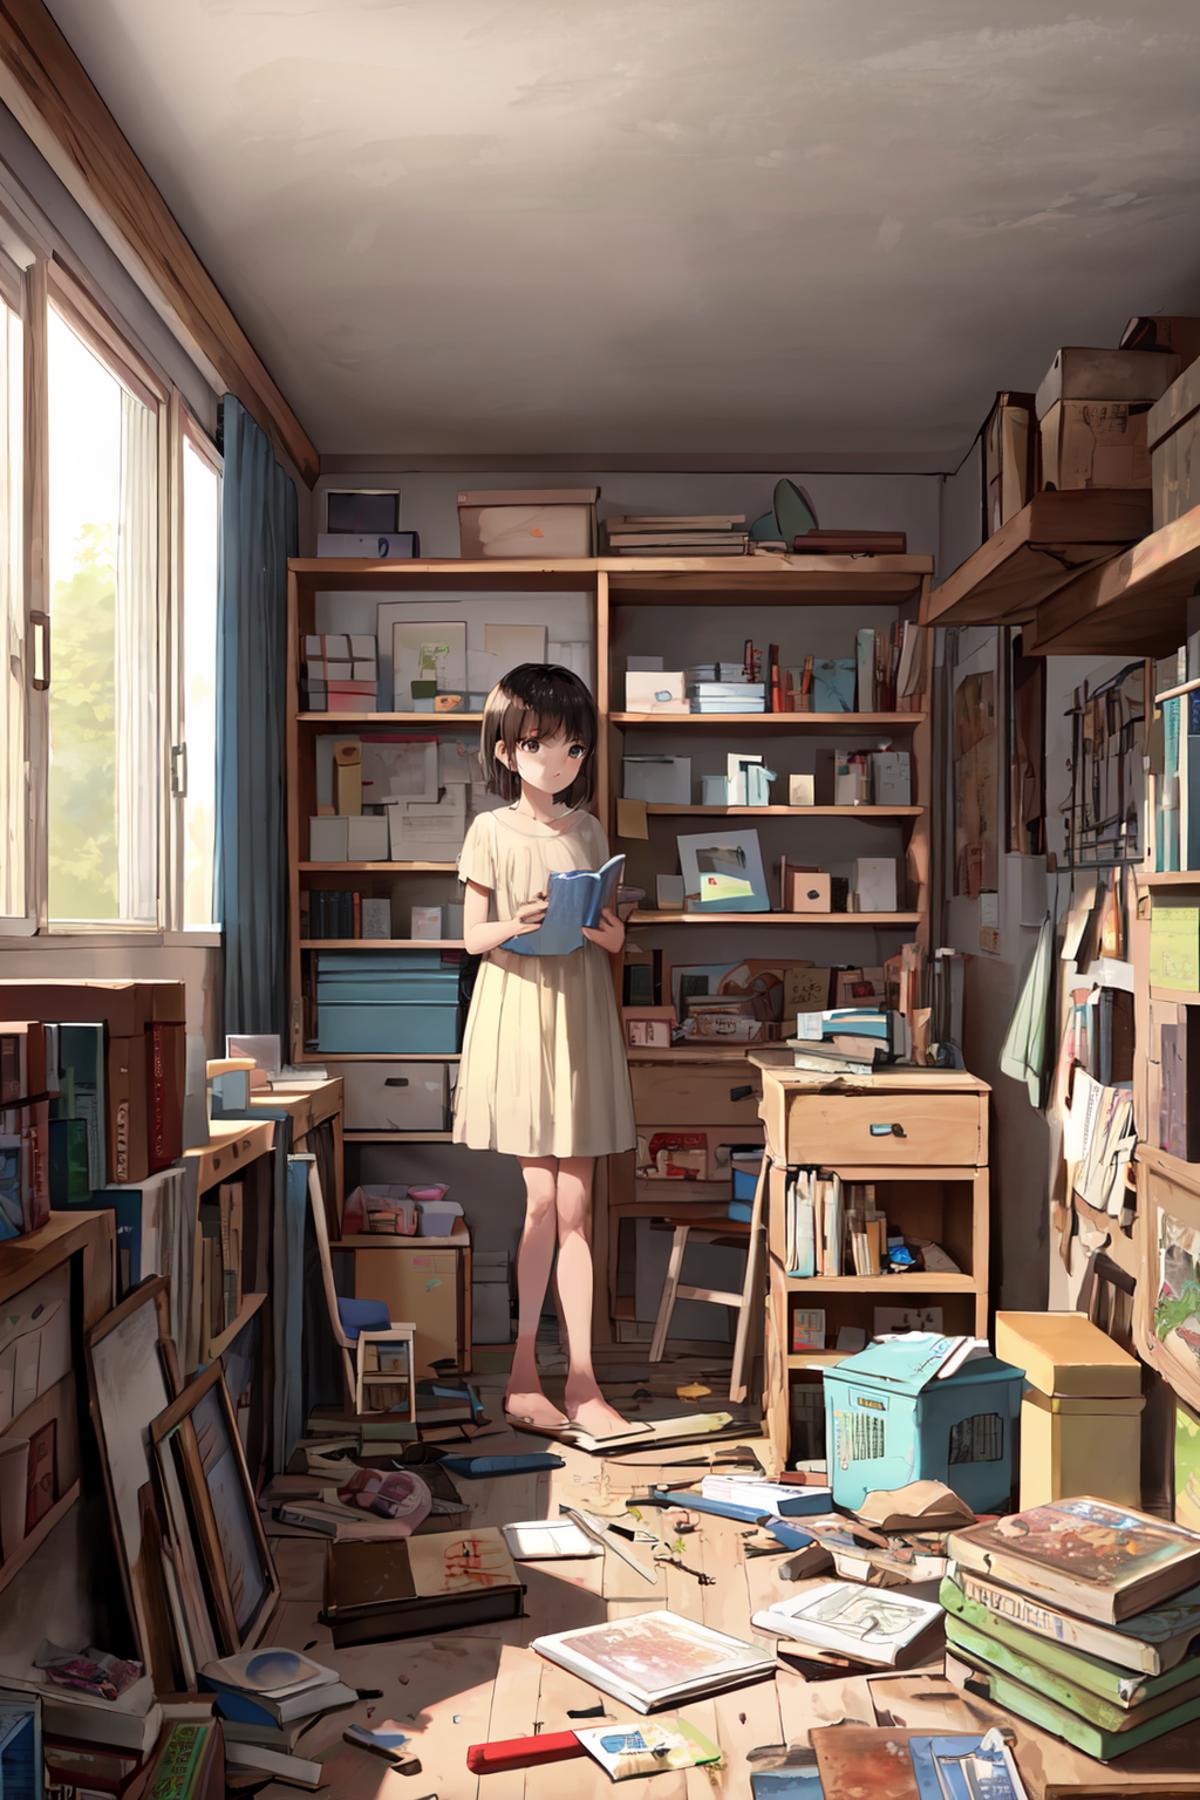 Clutter image by kokurine